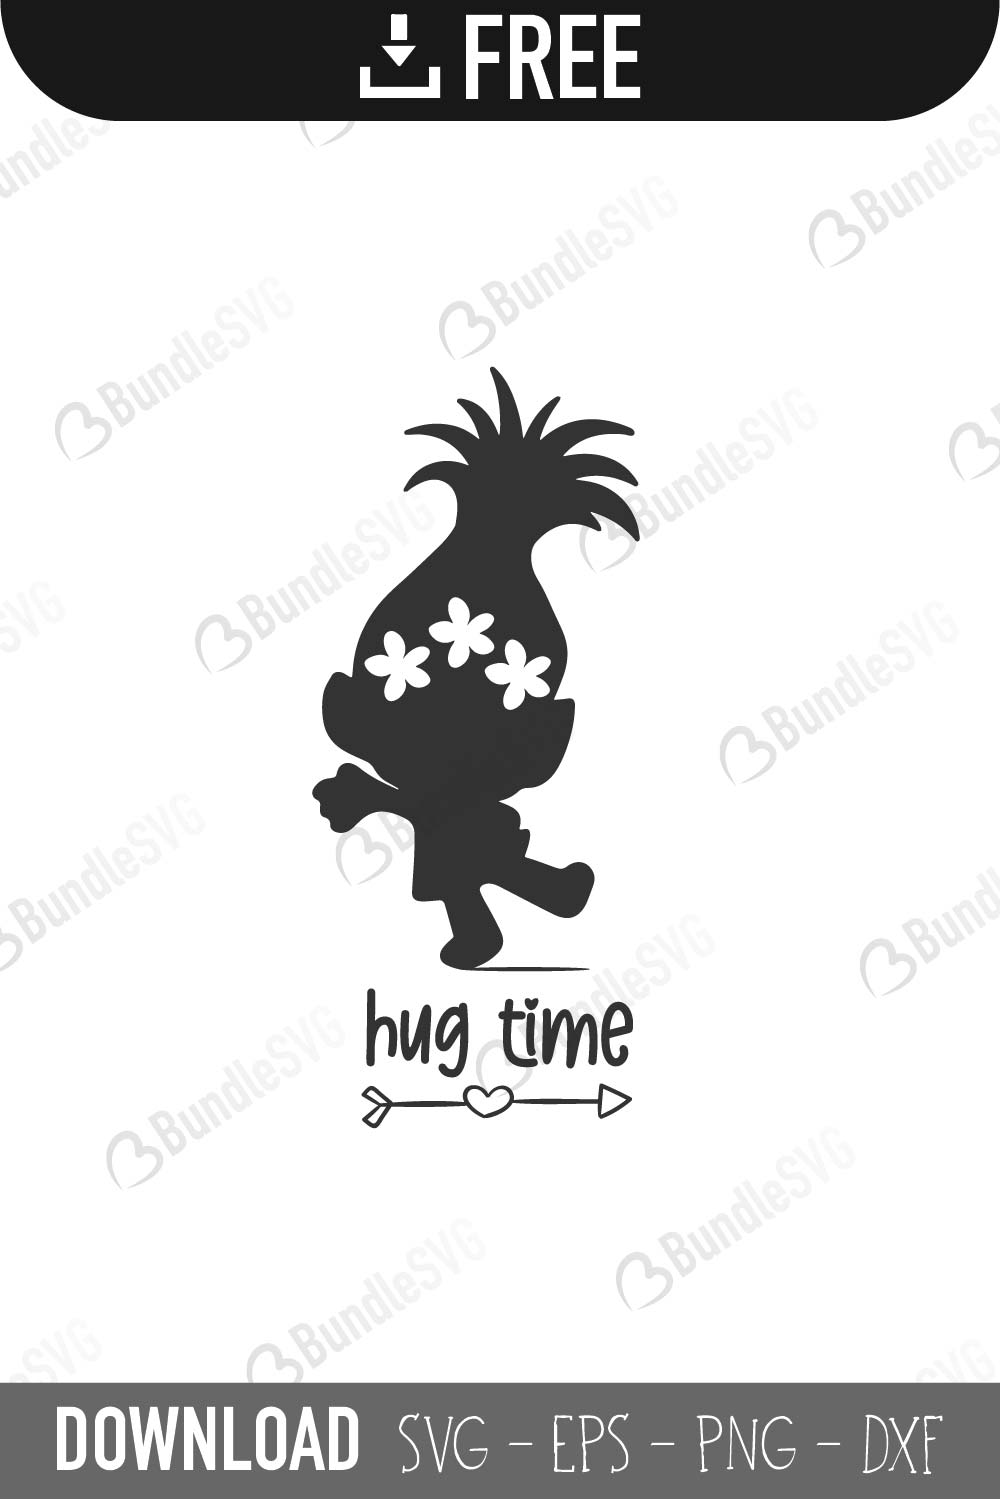 Internet Troll Face Silhouettes Digital Download, SVG, PNG, Cricut,  Silhouette Cut File, Instant Download